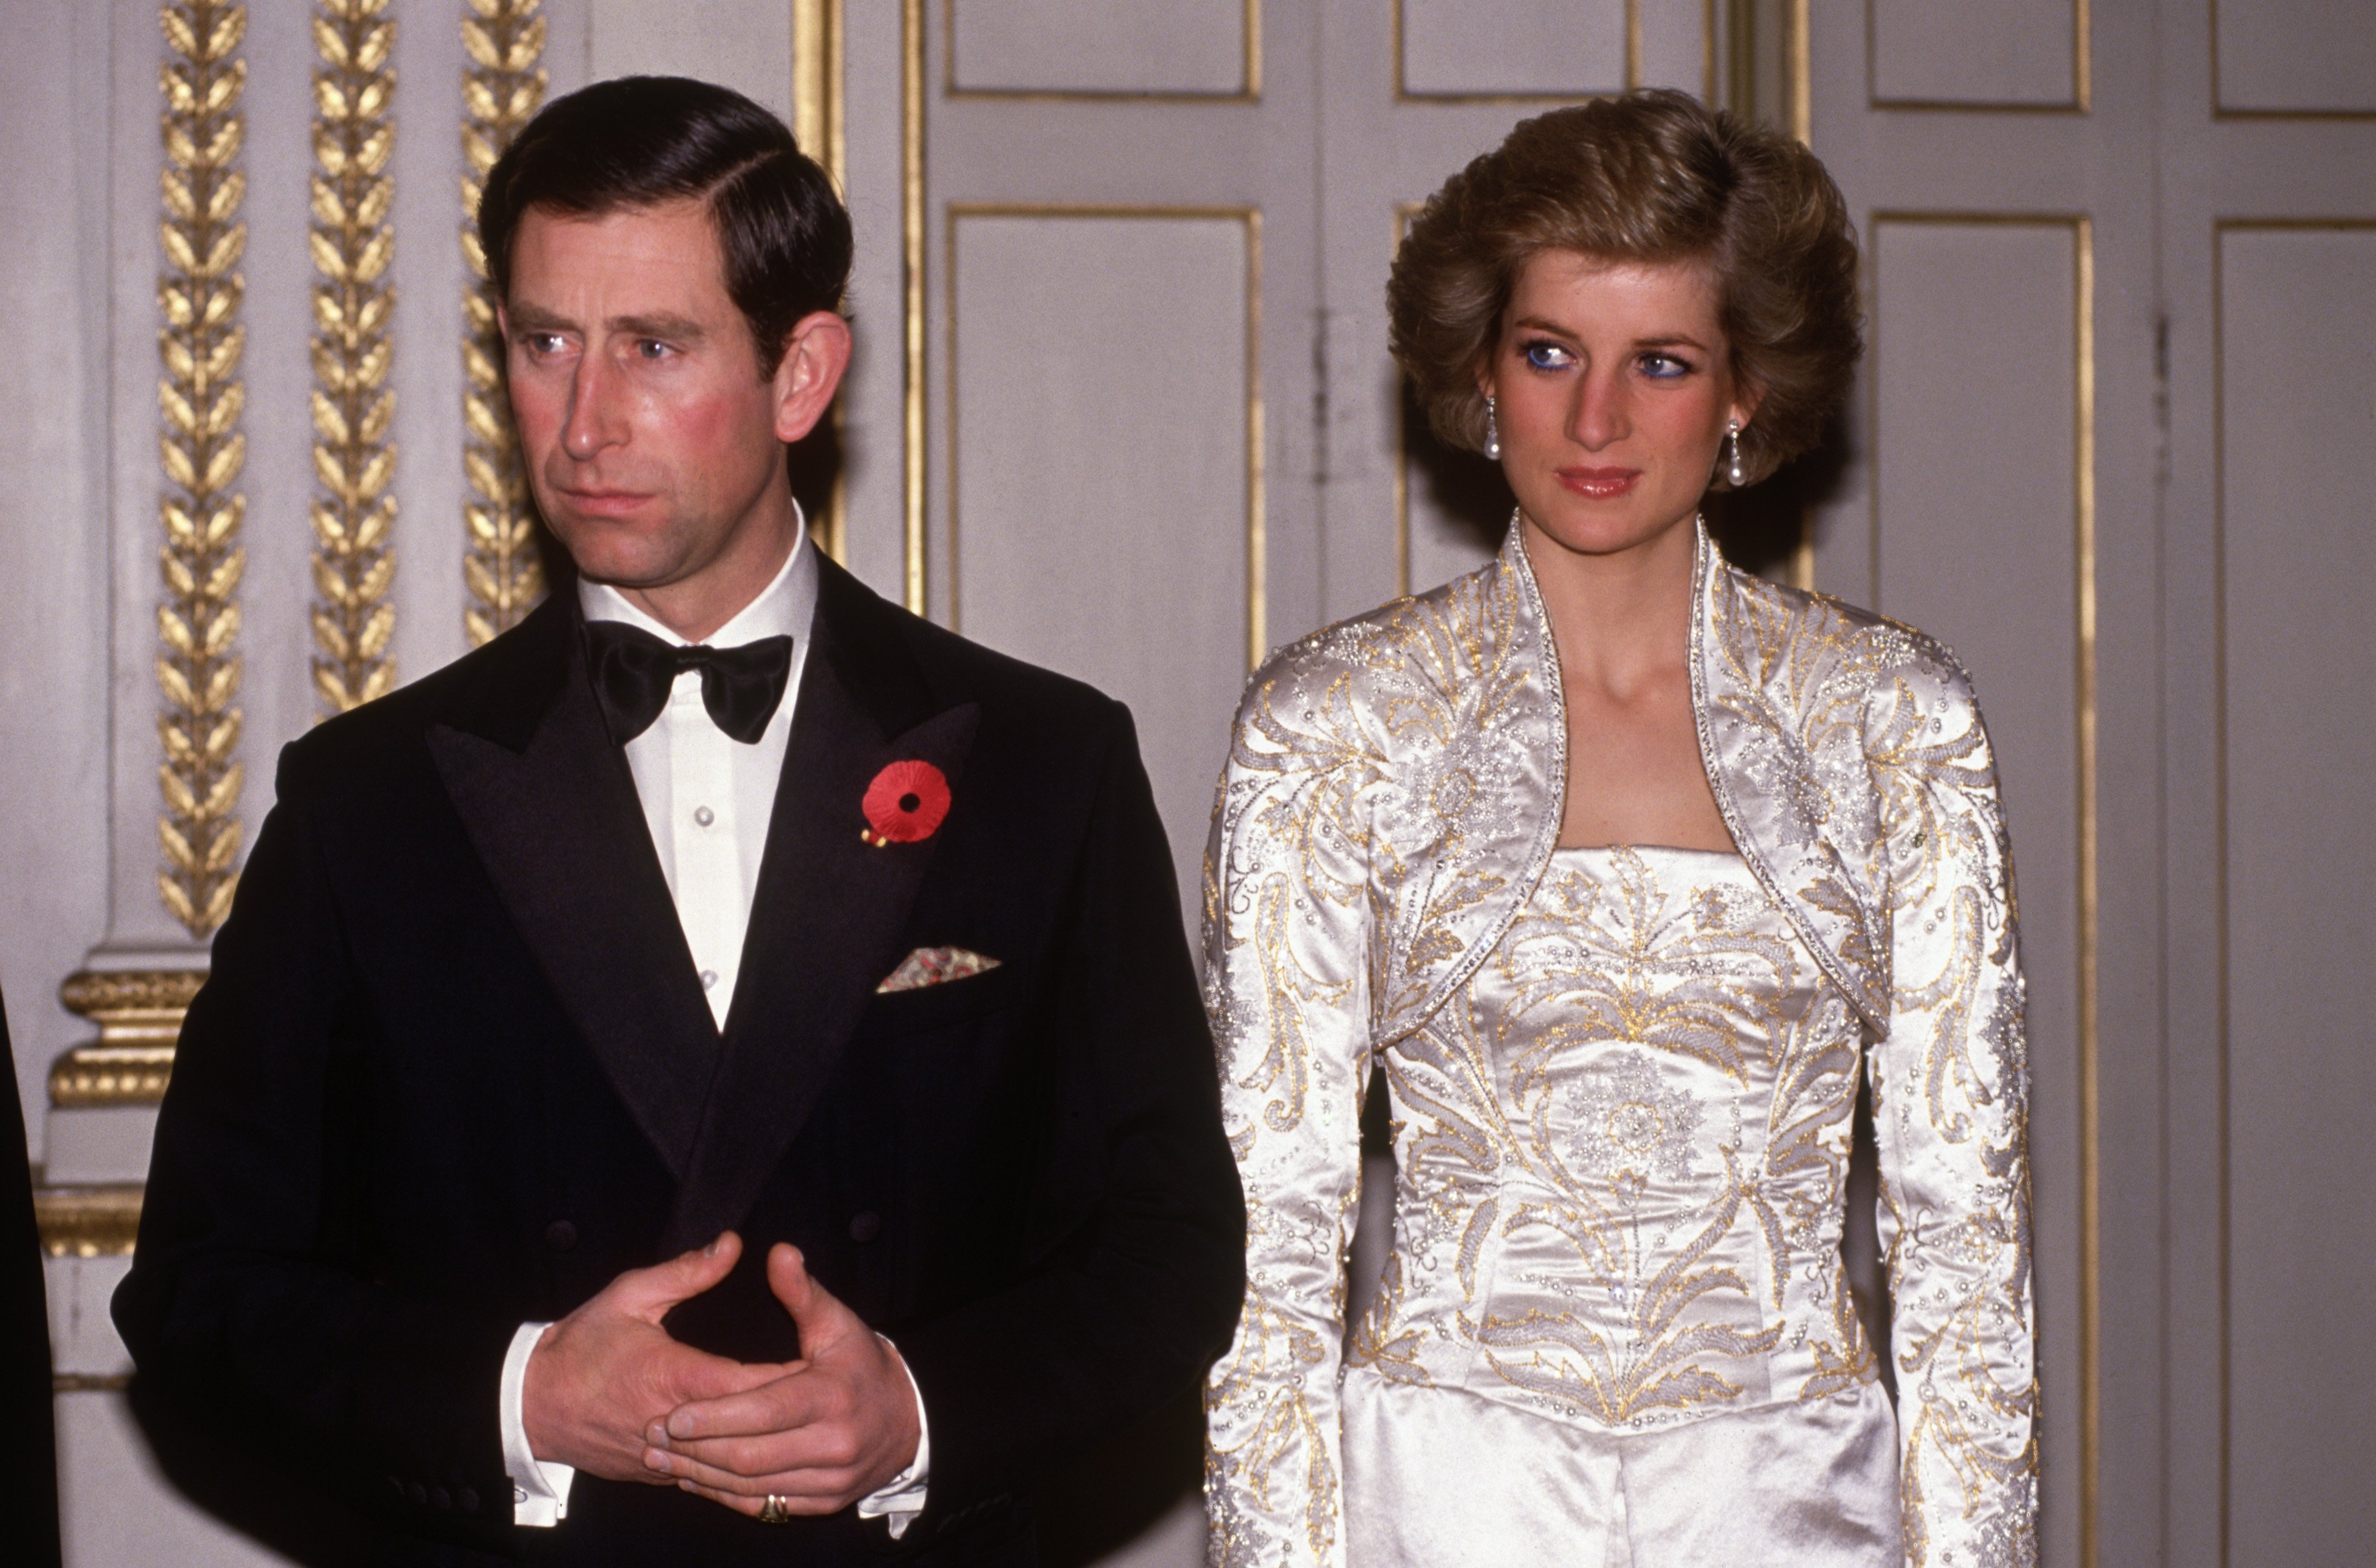 Princess Diana and Prince Charles in Paris 1988. | Source: Getty Images 